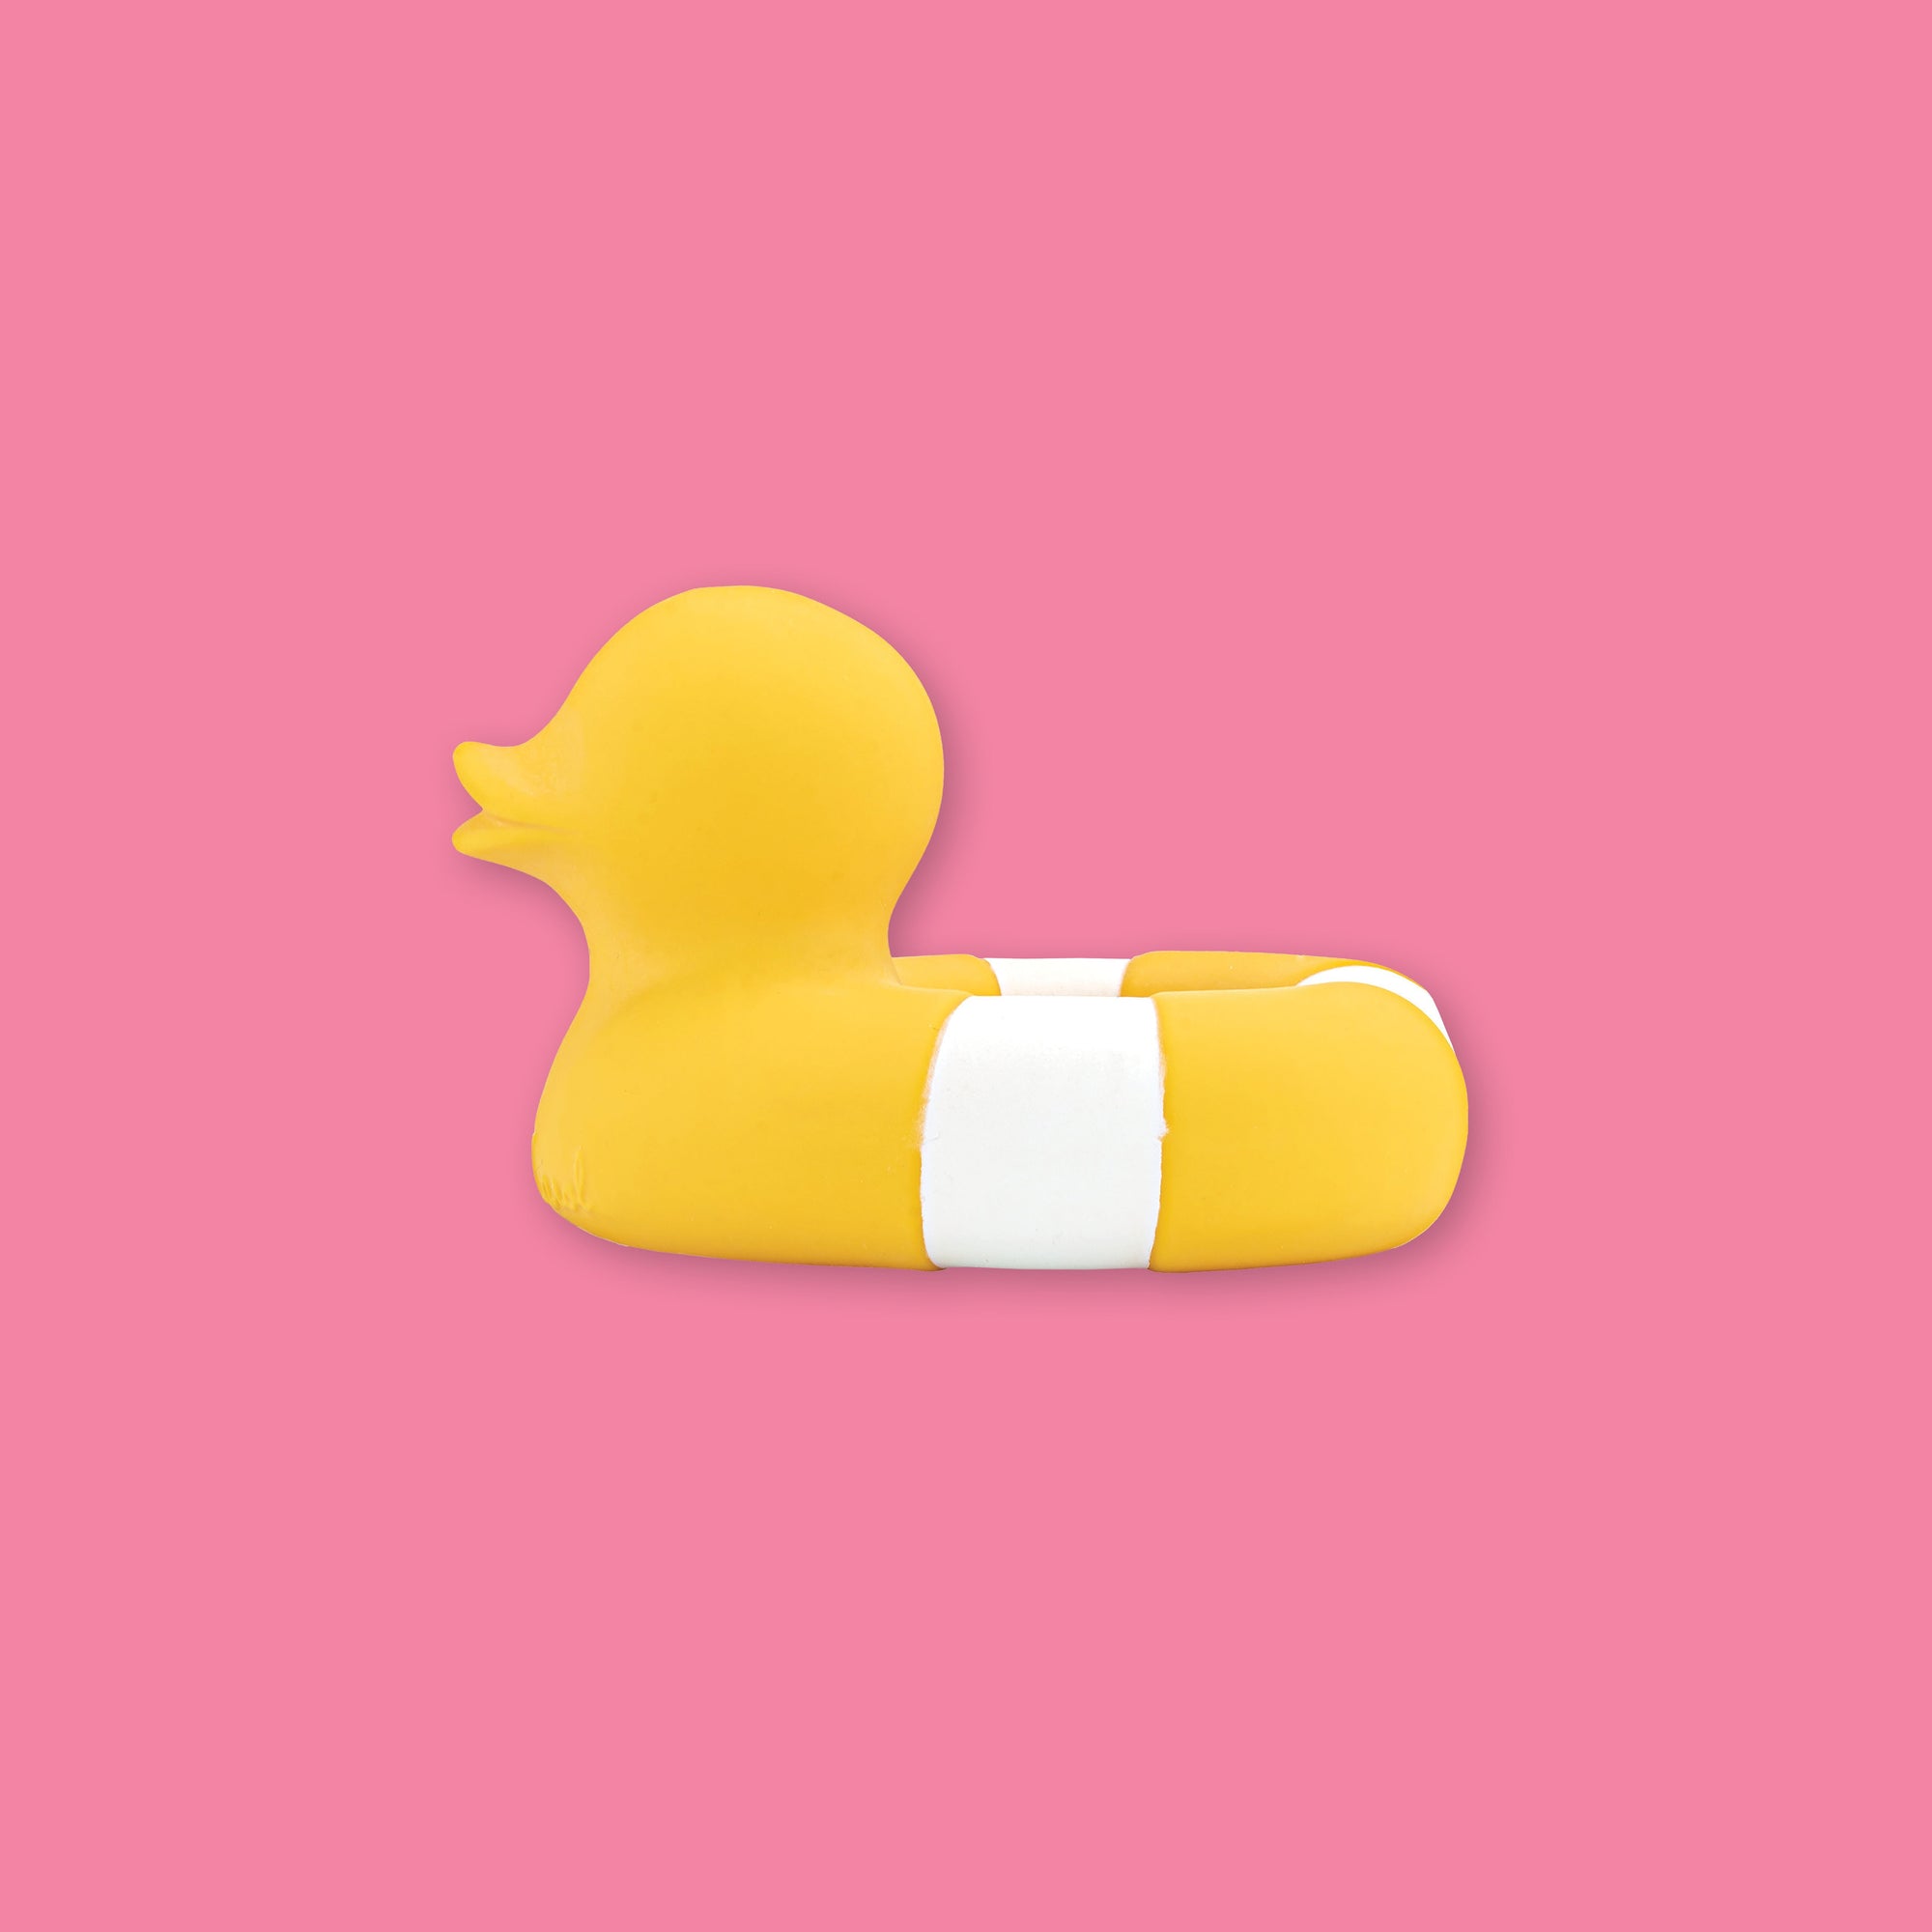 On a bubblegum pink background sits a yellow and white rubber duckie.